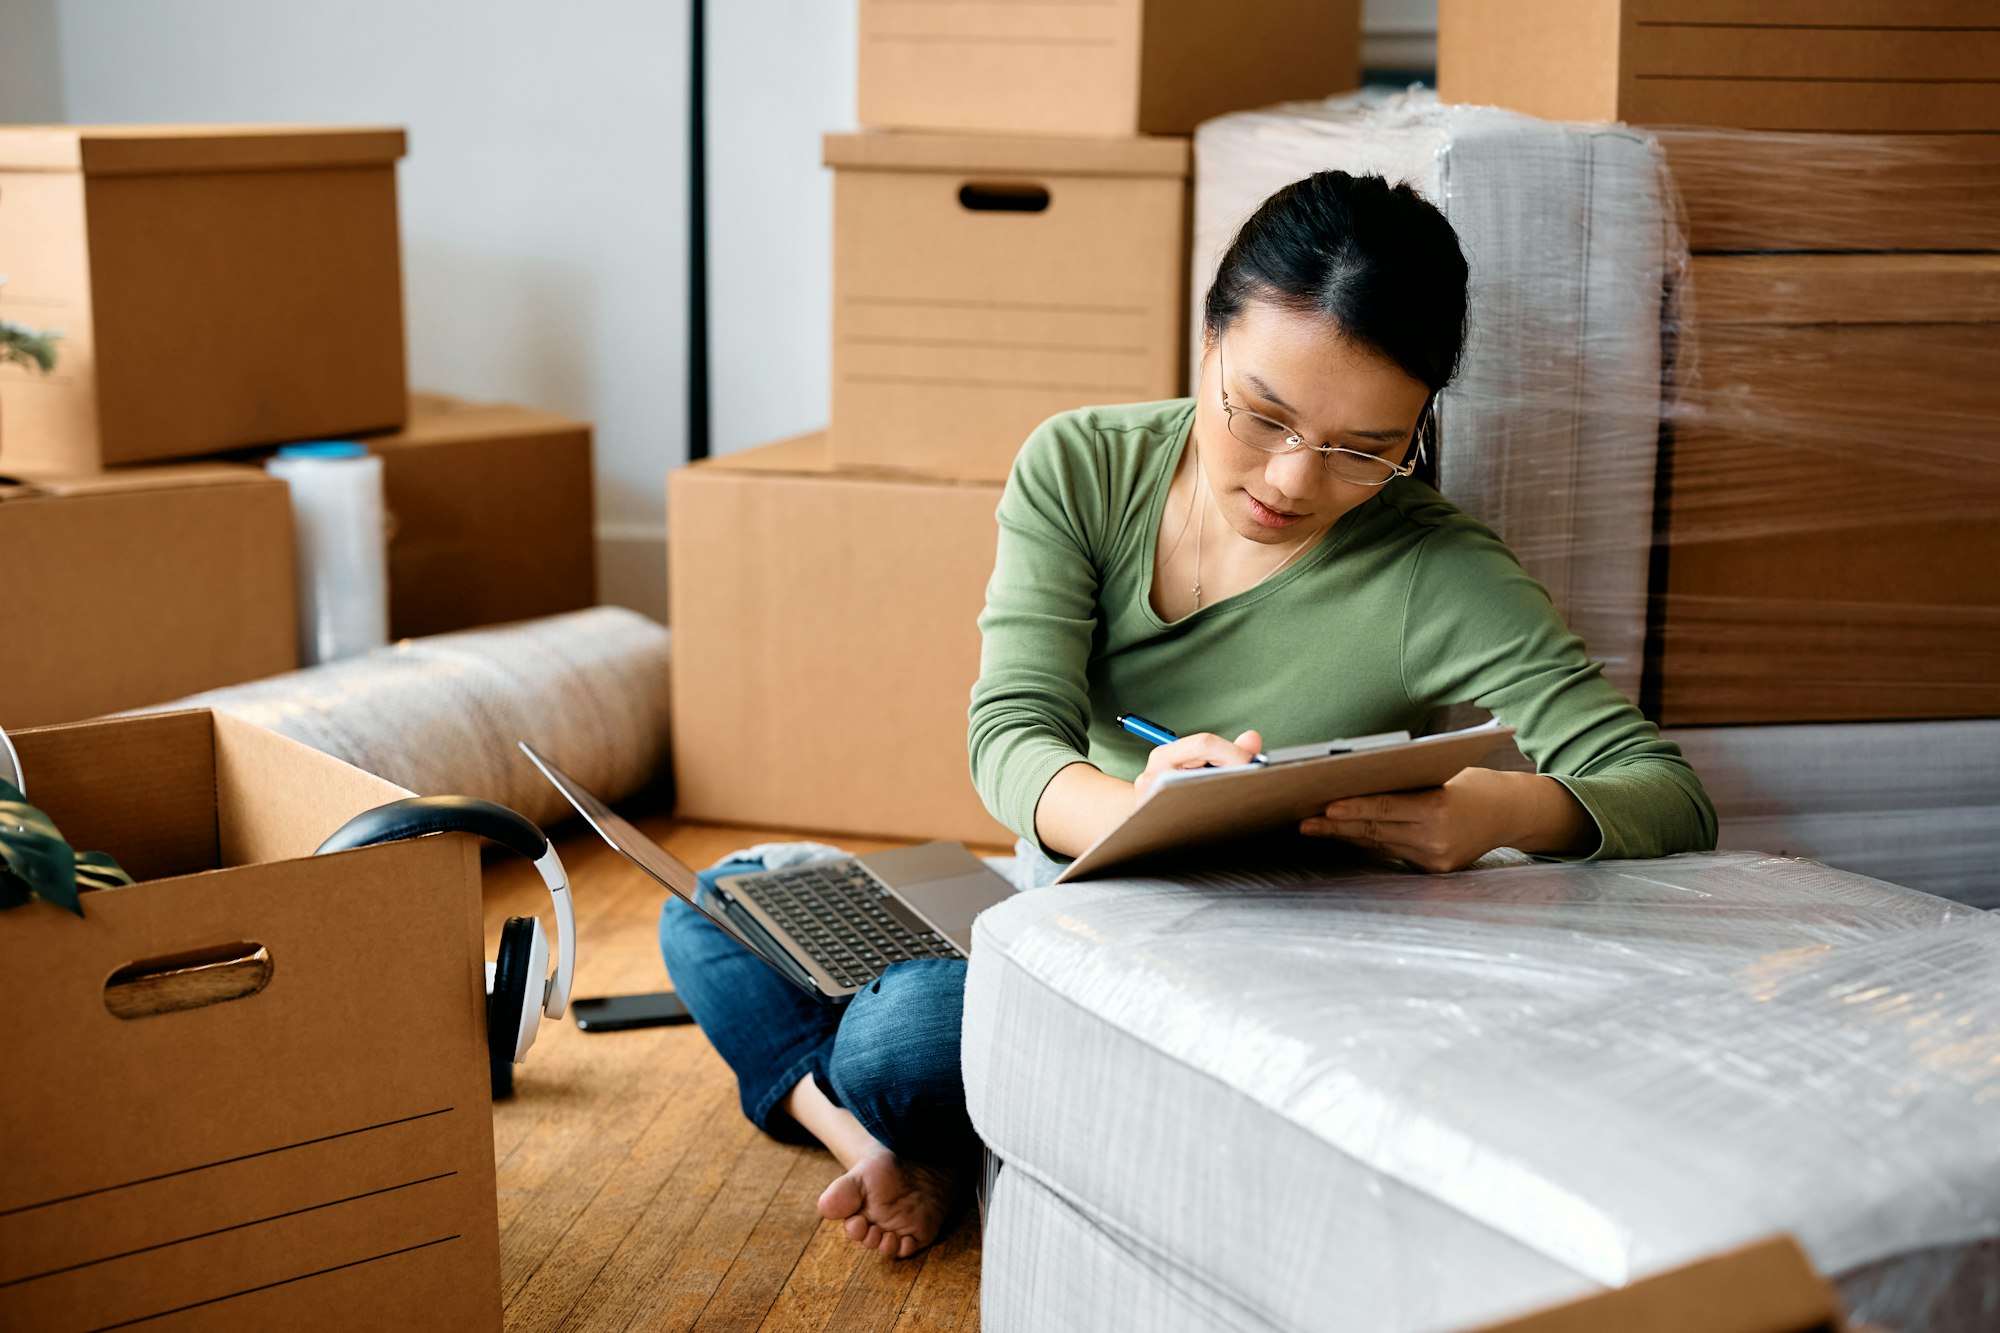 Asian woman going through checklist while using laptop and moving into a new home.